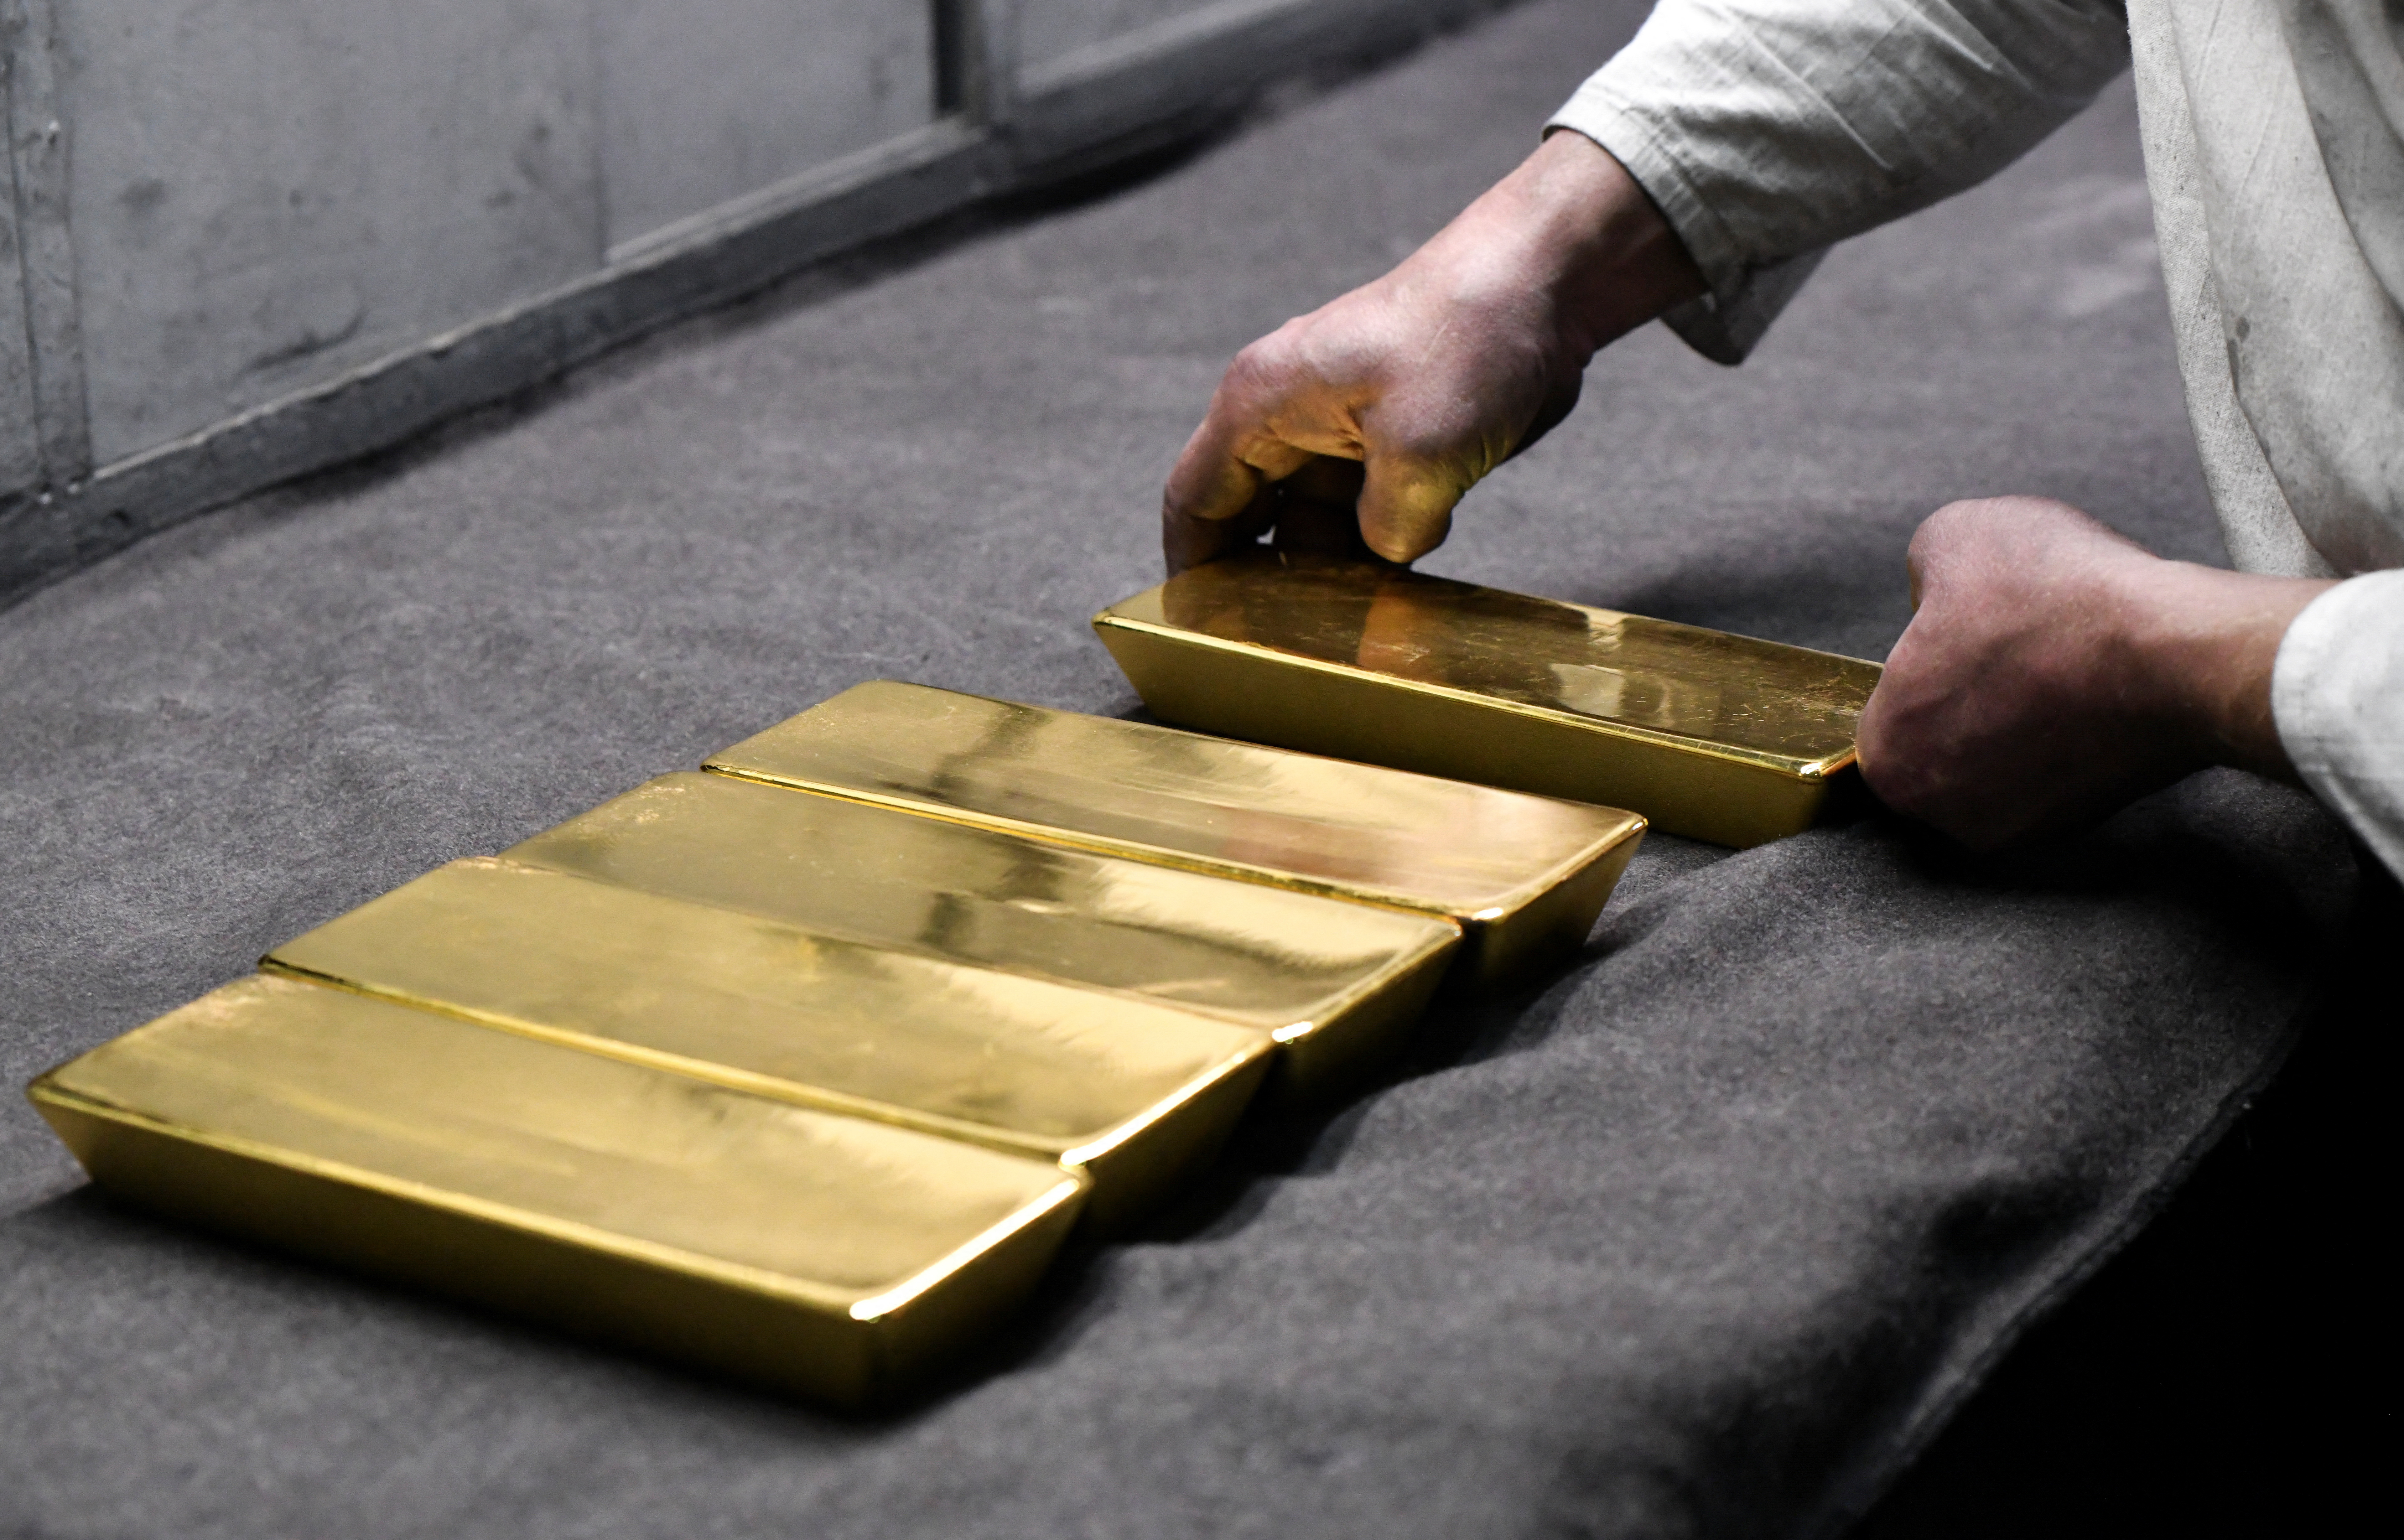 Gold price hits all-time high as traders bet on interest rate cuts